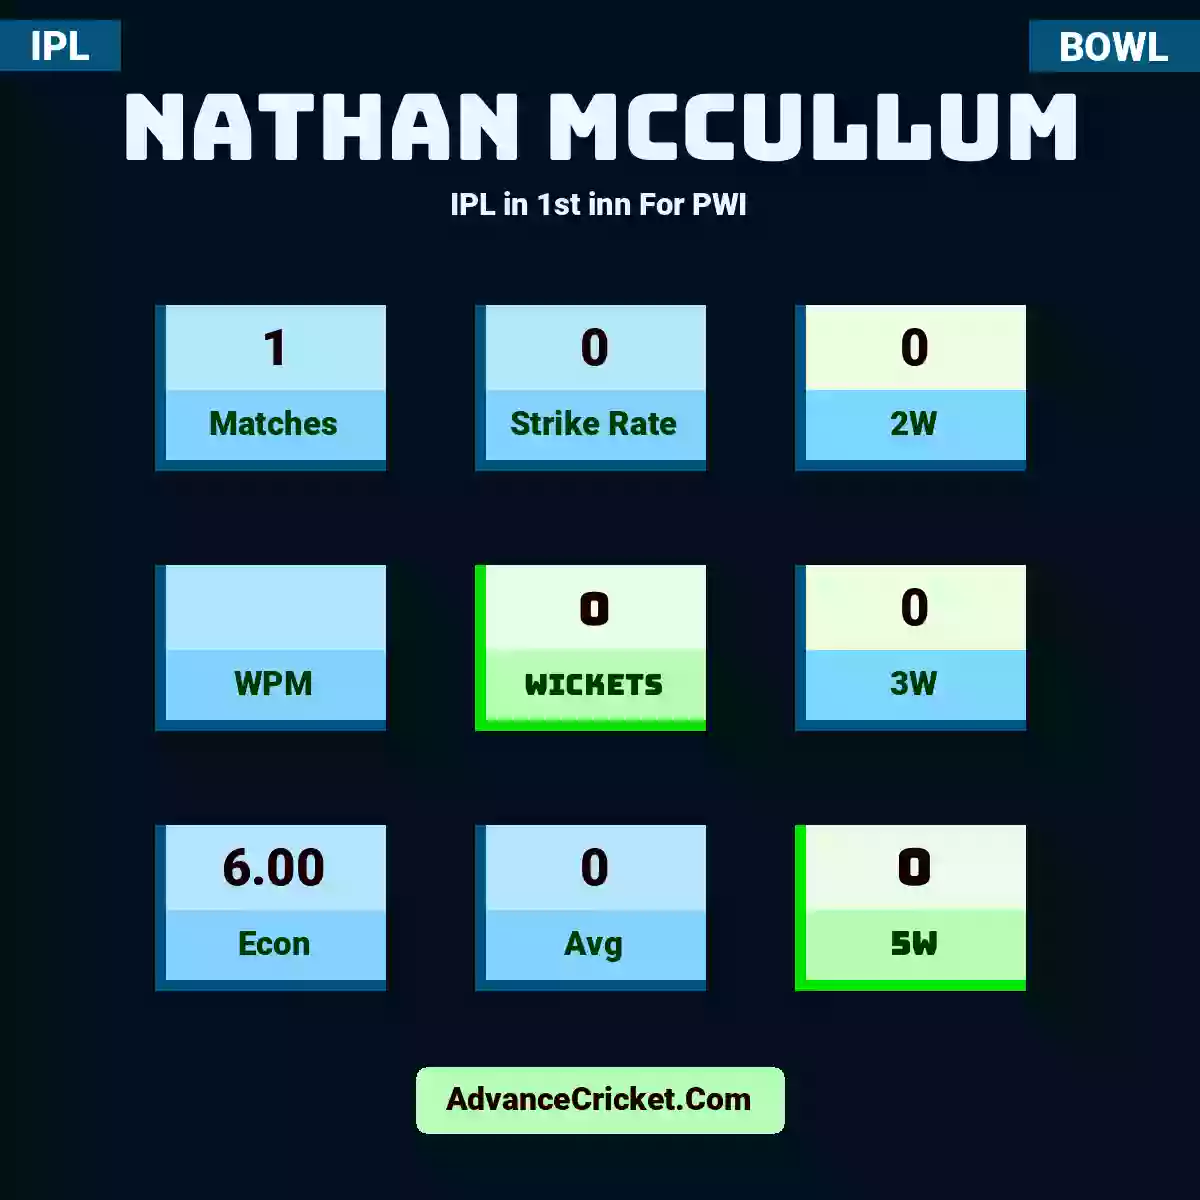 Nathan McCullum IPL  in 1st inn For PWI, Nathan McCullum played 1 match in this IPL mode, with a SR of 0. N.McCullum took 0 2W, with a WPM of . Nathan McCullum secured 0 wickets, including 0 3W hauls, with an Econ of 6.00 and Avg of 0. Additionally, N.McCullum achieved 0 5W hauls.